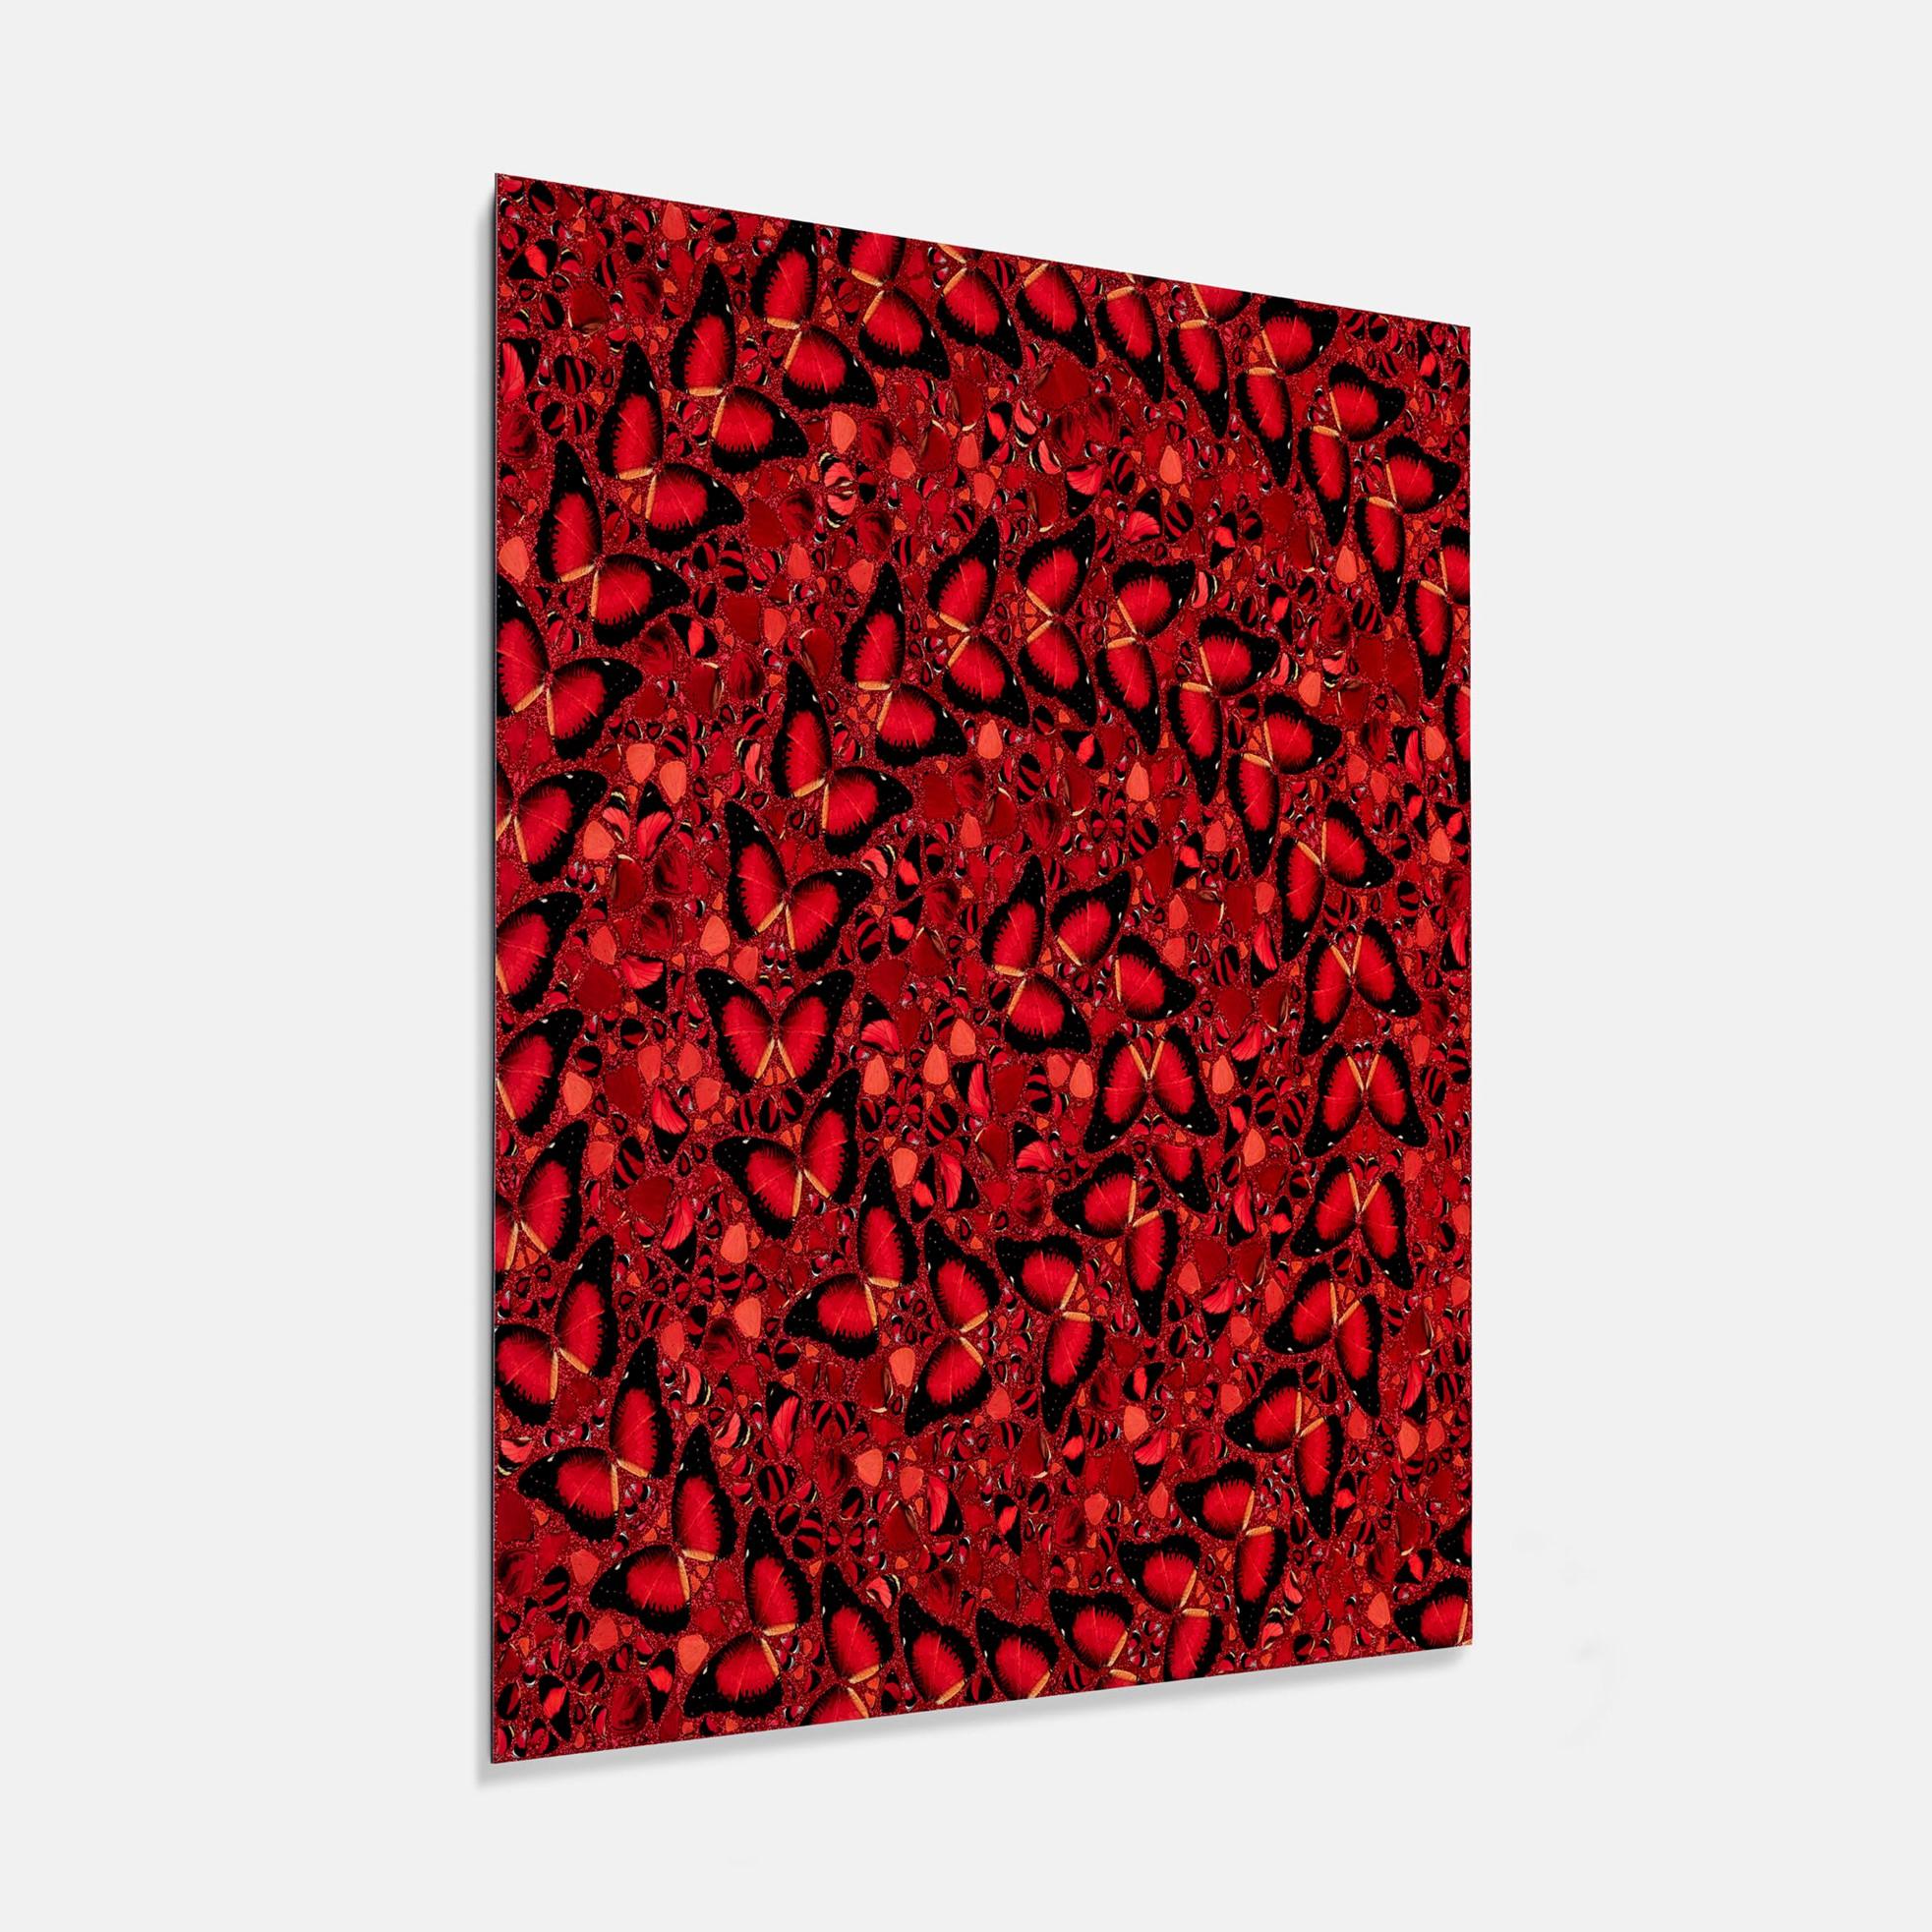 Taytu Betul by Damien Hirst, The Empresses, Red Butterflies kaleidoscope effect For Sale 1